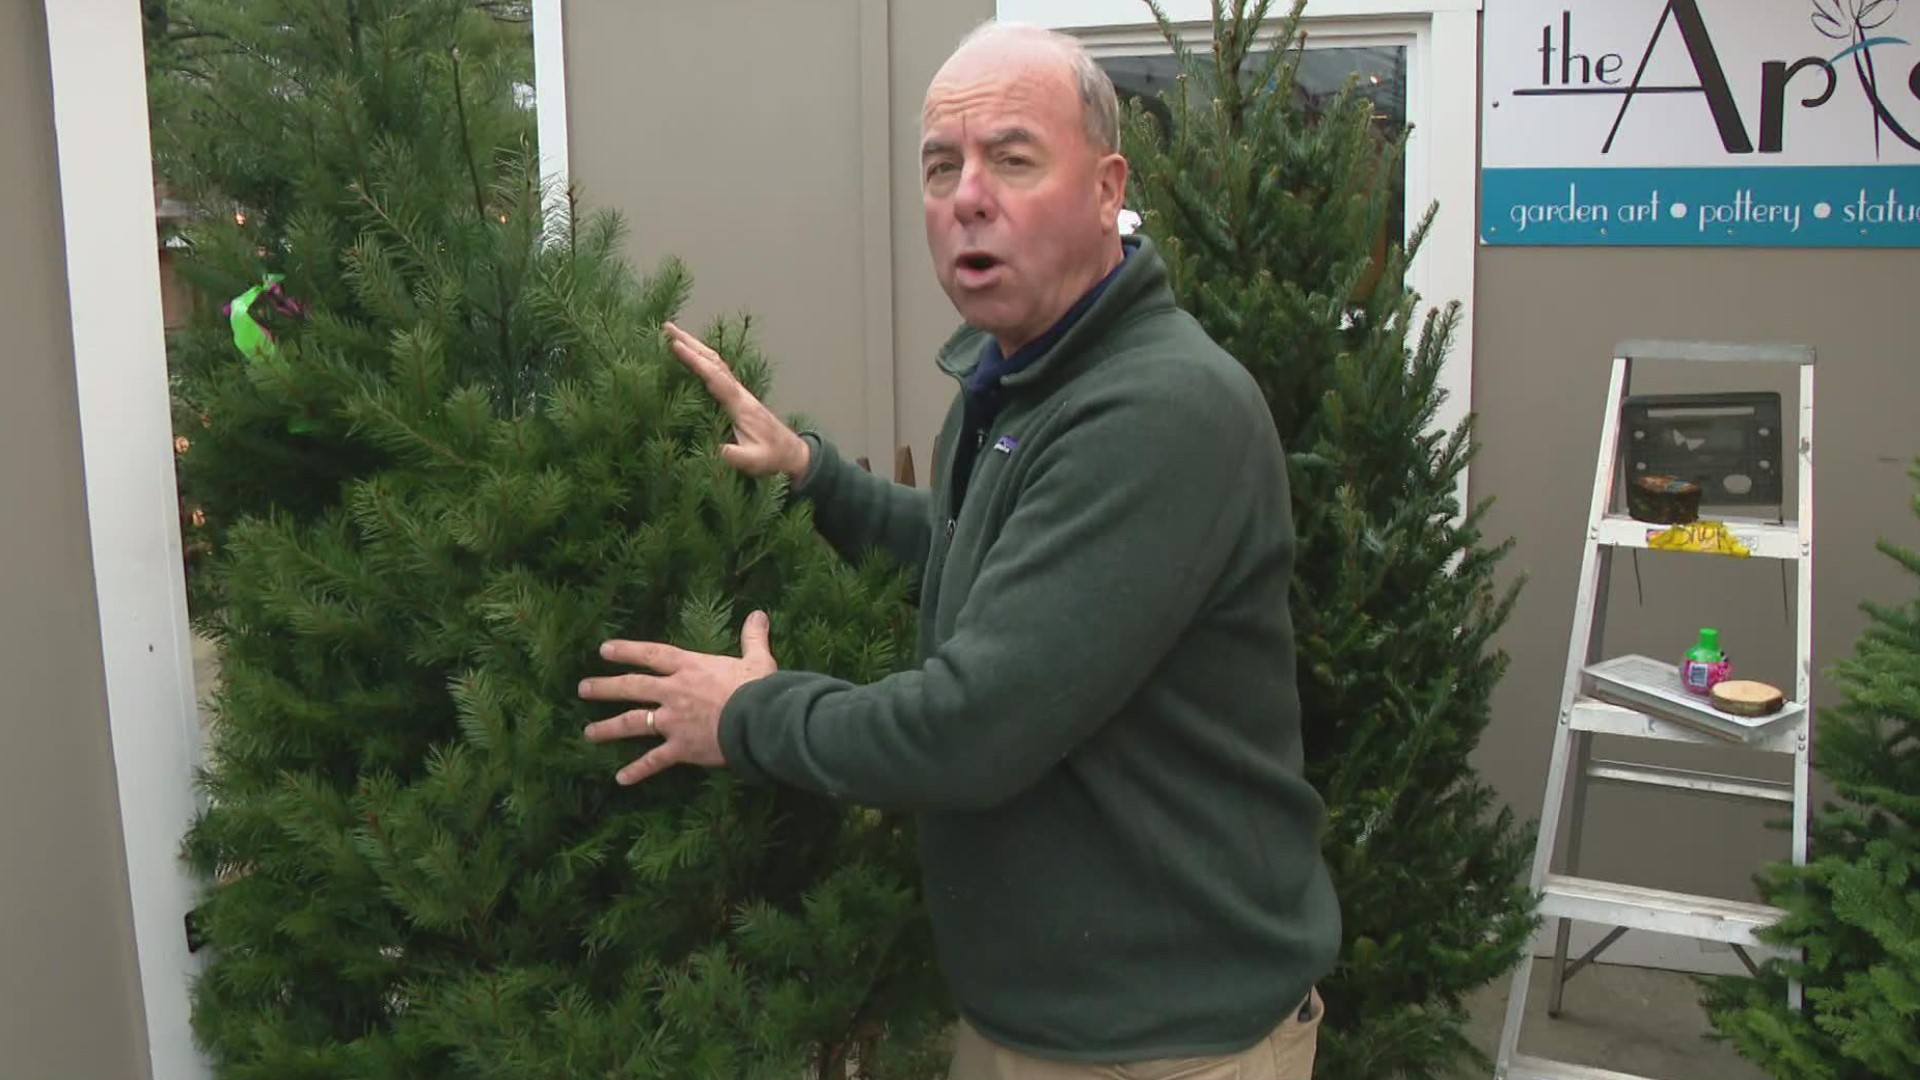 This is a big weekend for freshly cut Christmas trees and, with regular watering, they should stay fresh through the holidays.